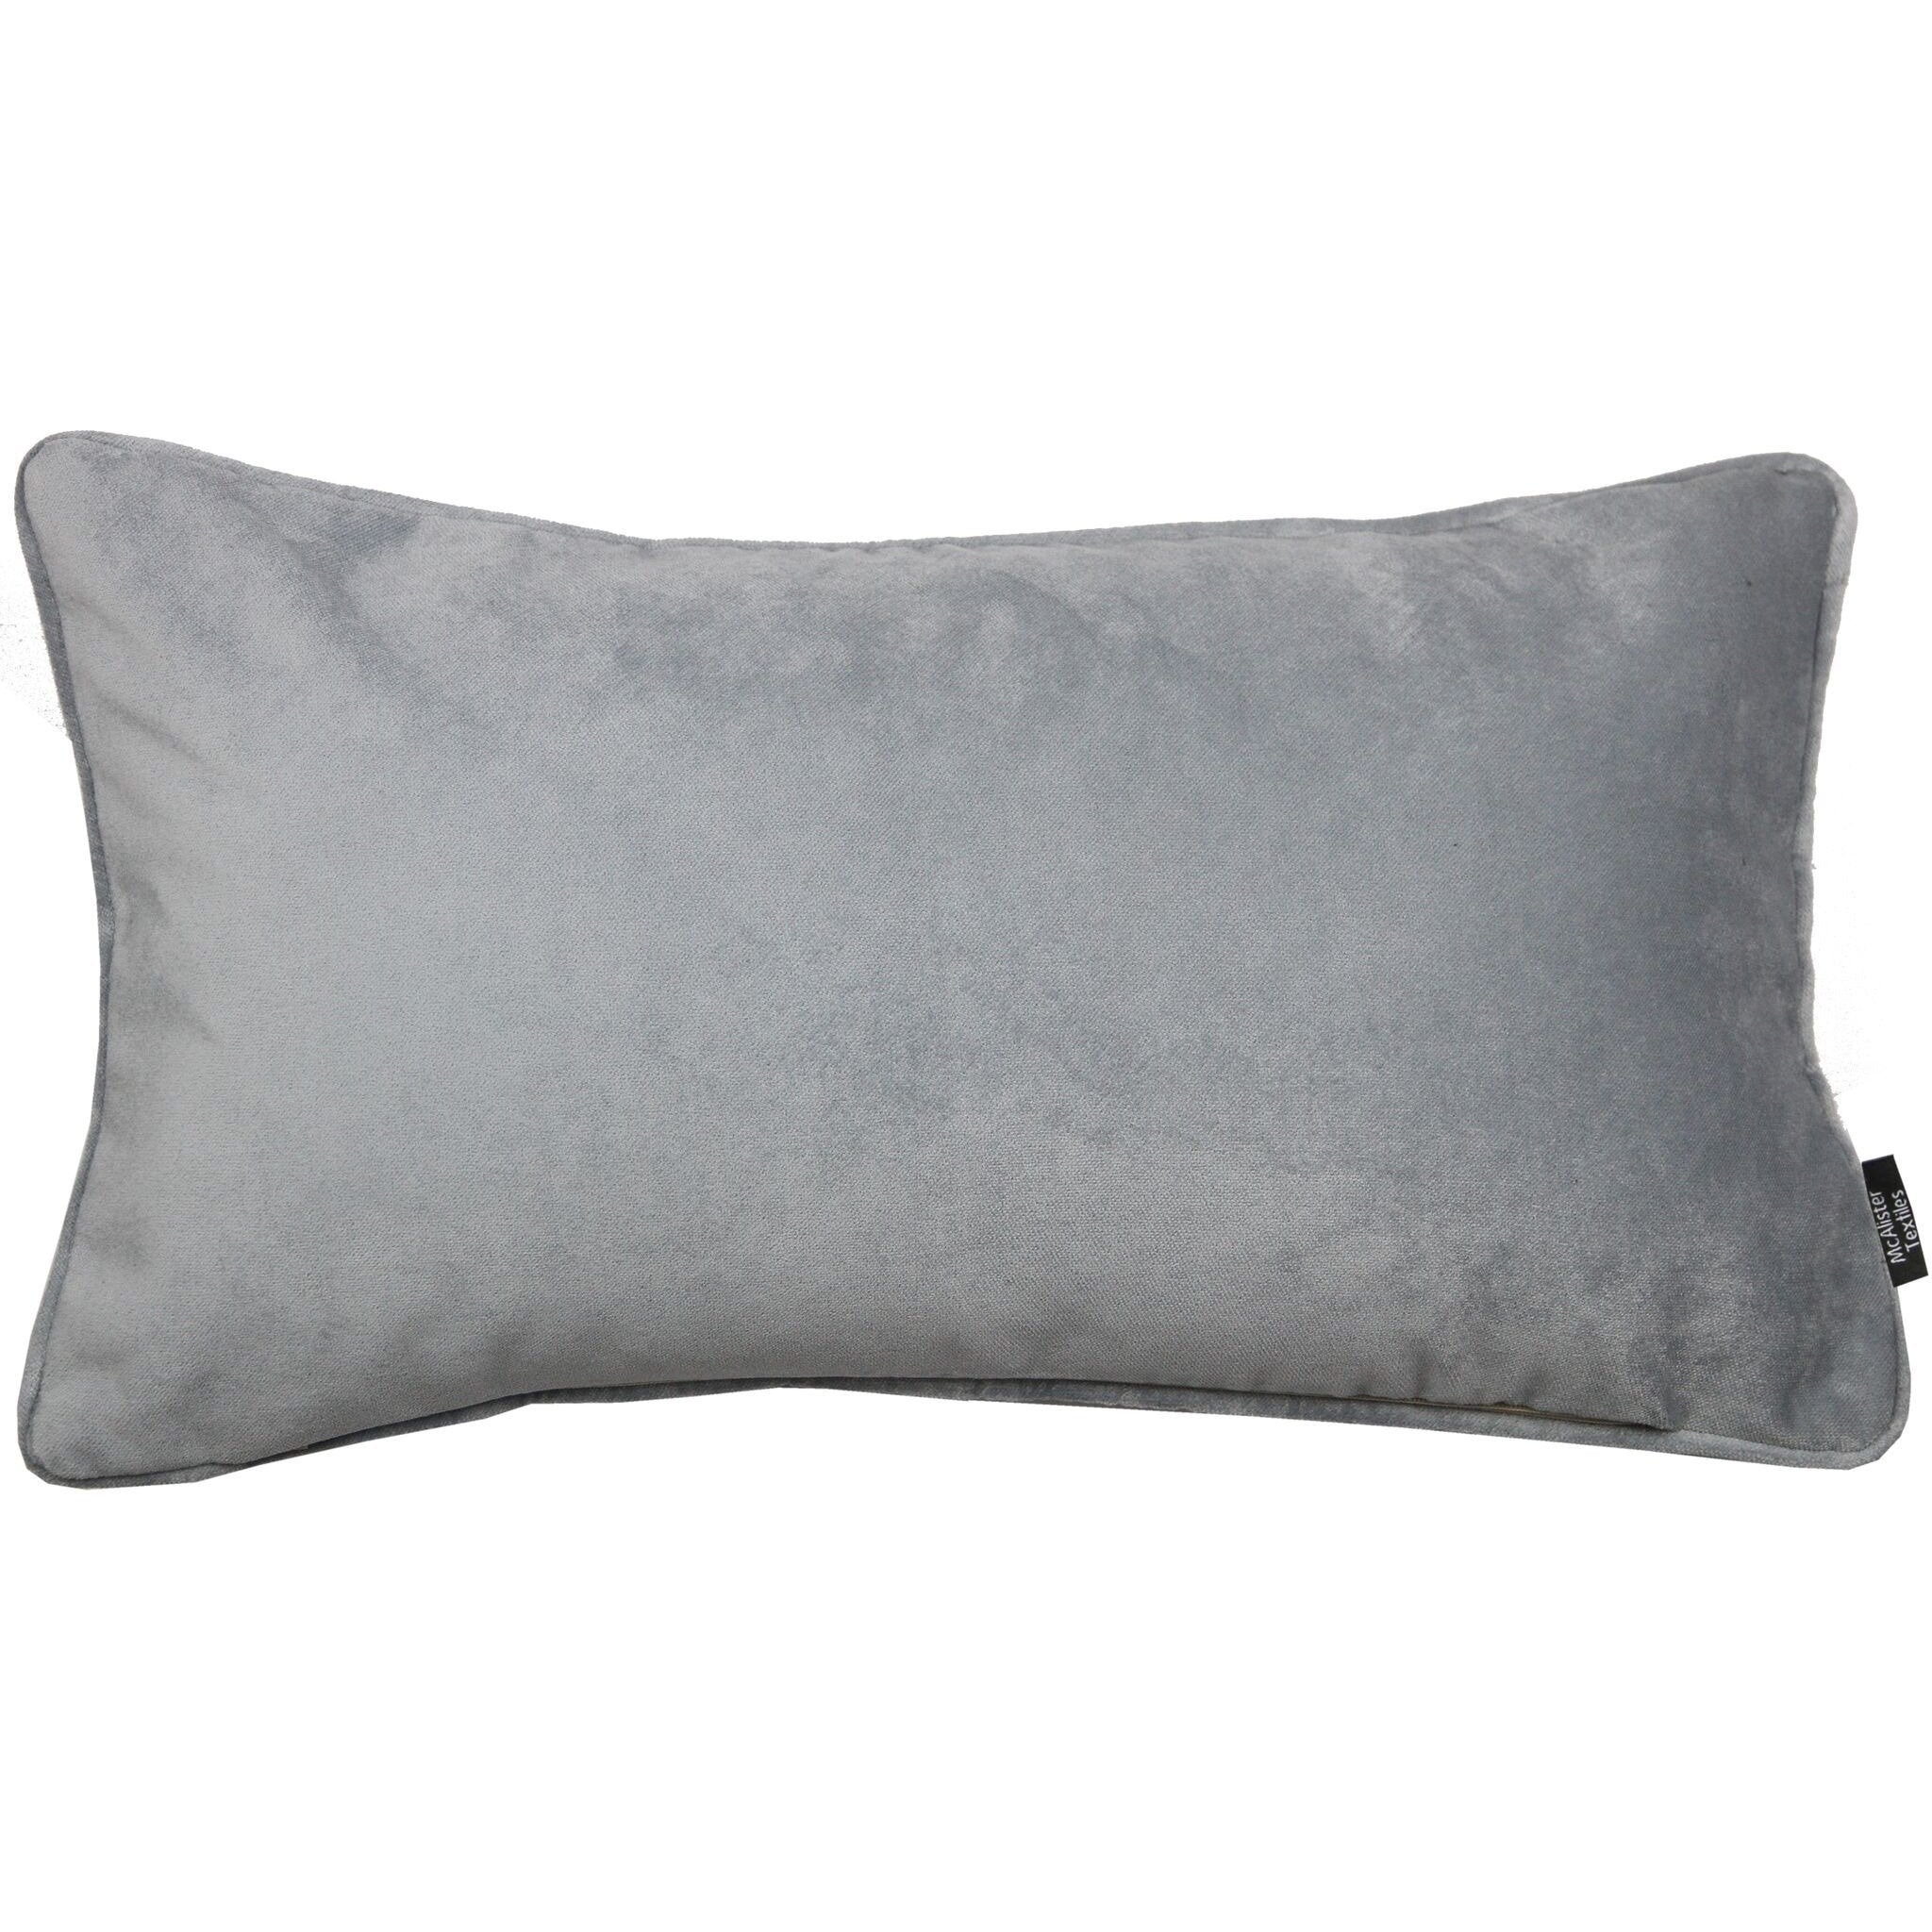 McAlister Textiles Matt Dove Grey Velvet Cushion Cushions and Covers Cover Only 50cm x 30cm 